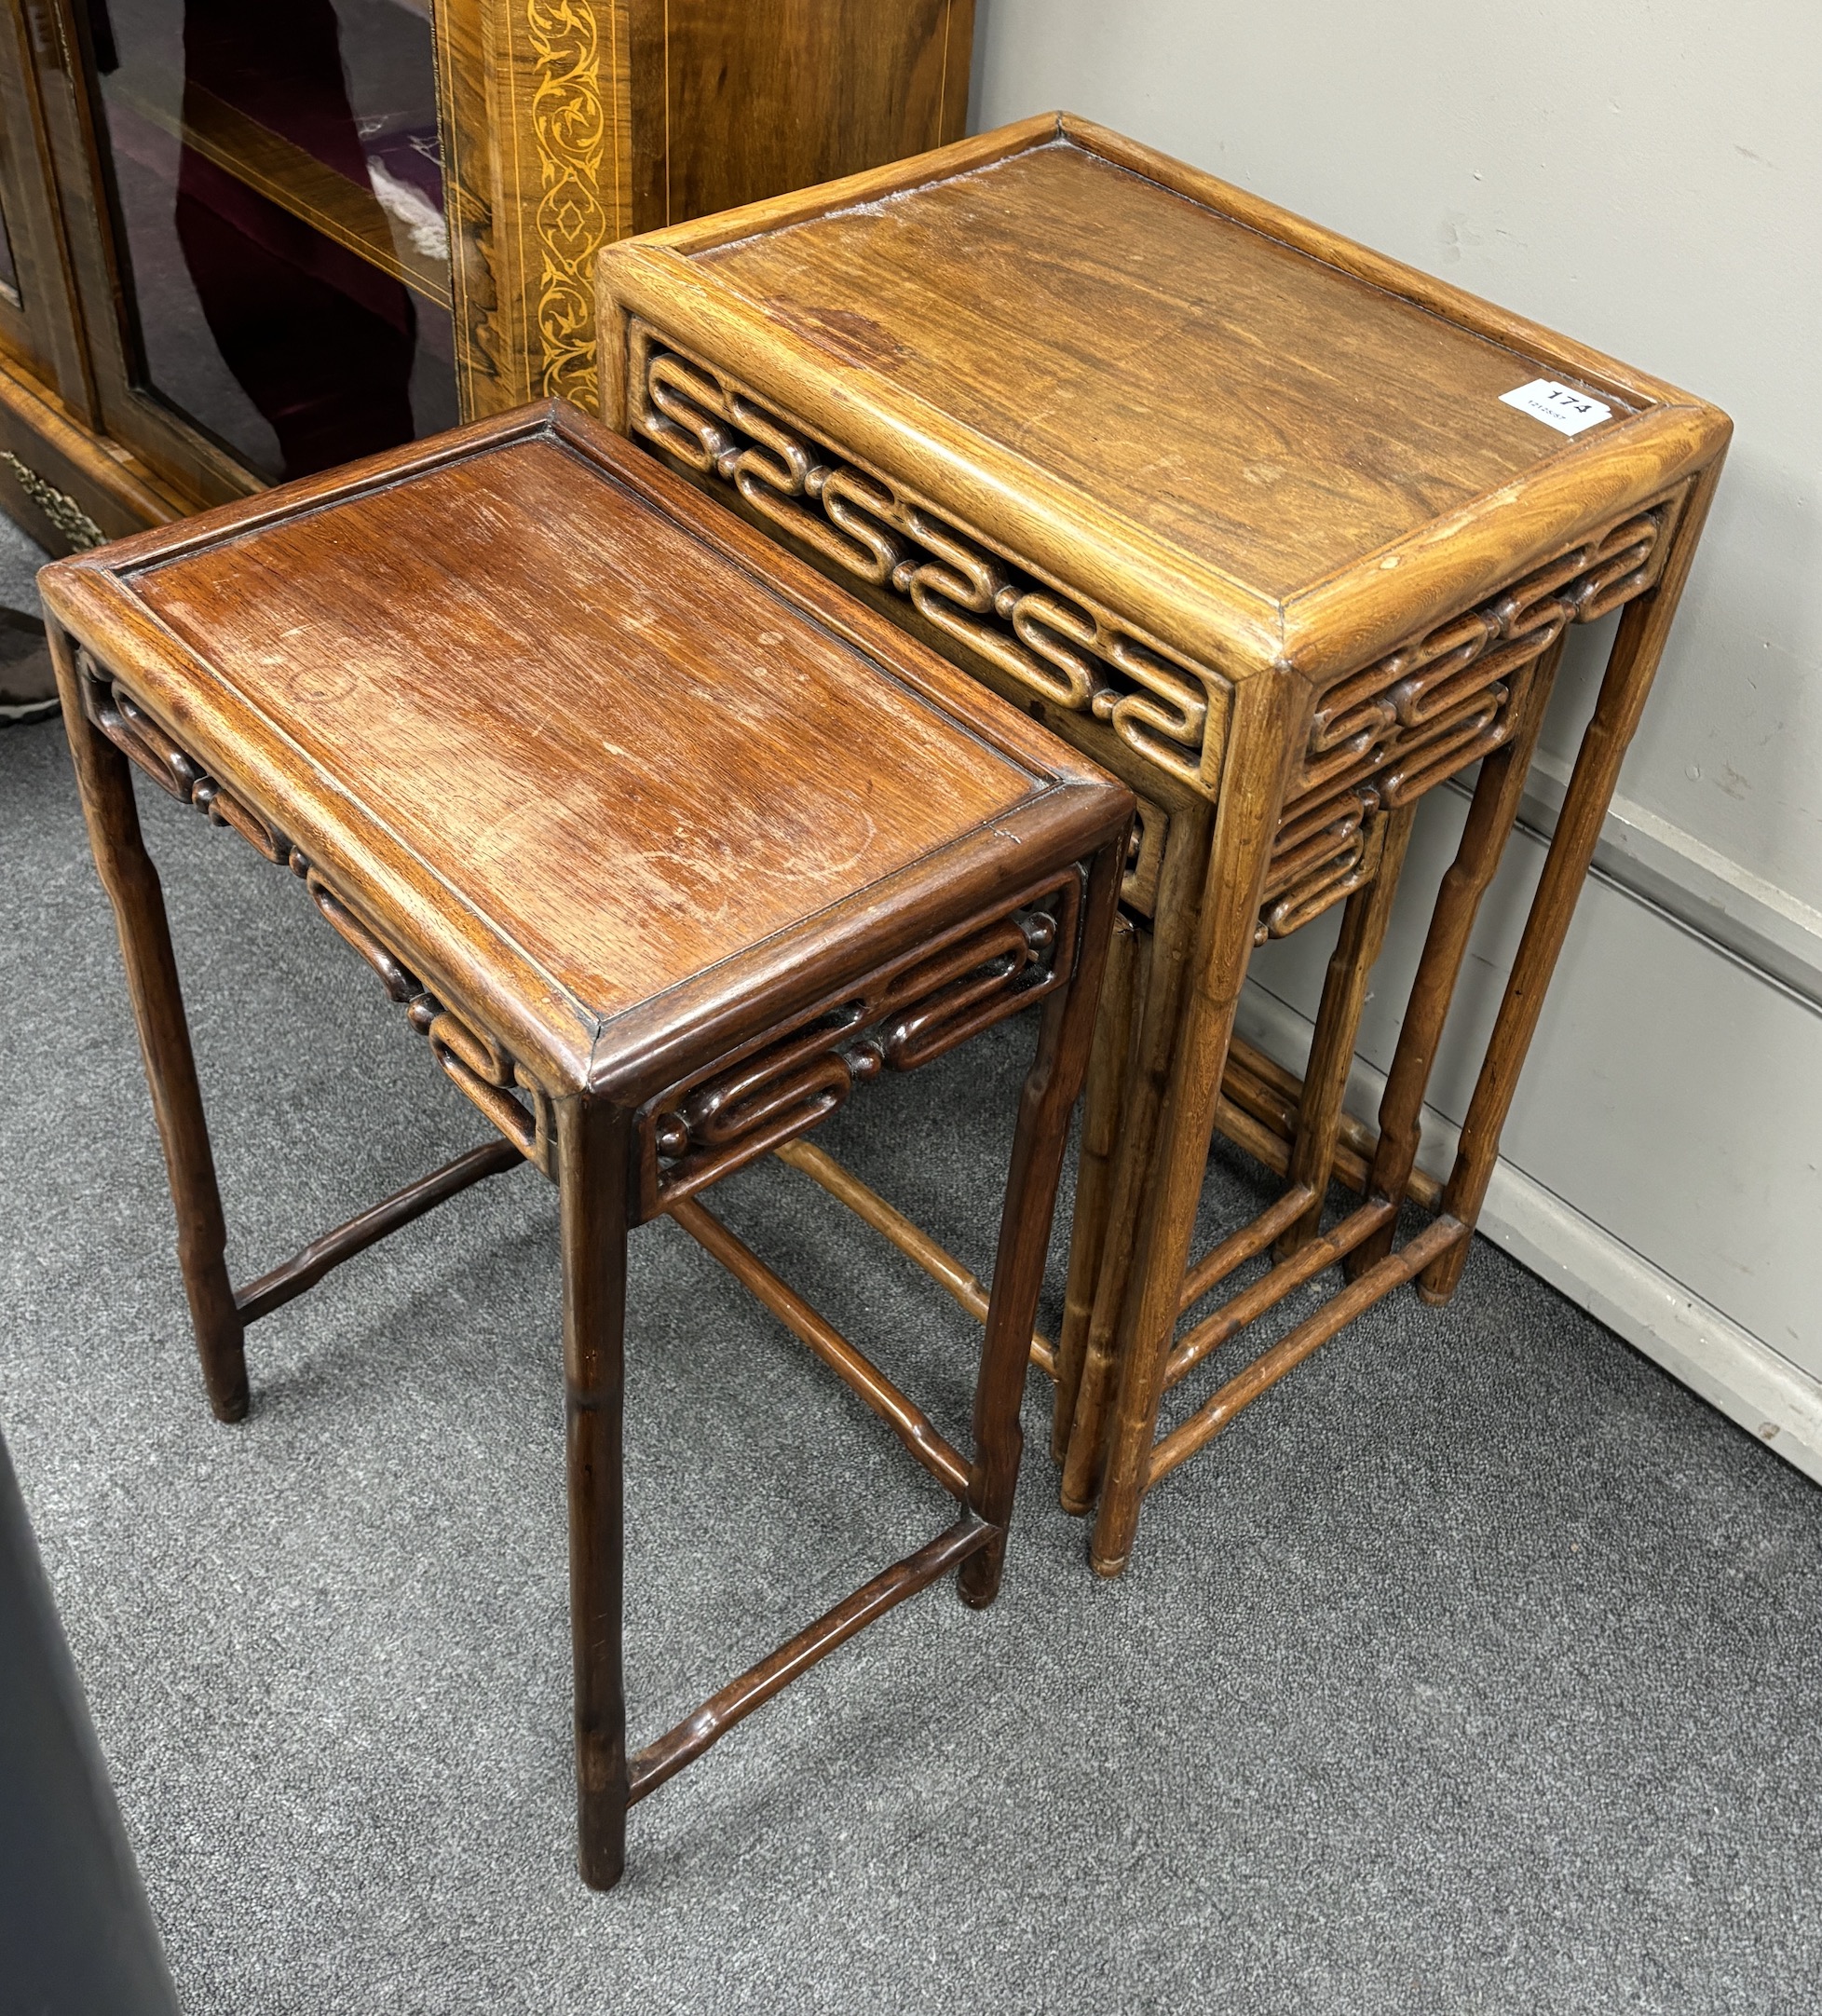 A nest of three Chinese tea tables, width 44cm, depth 32cm, height 62cm, and one other